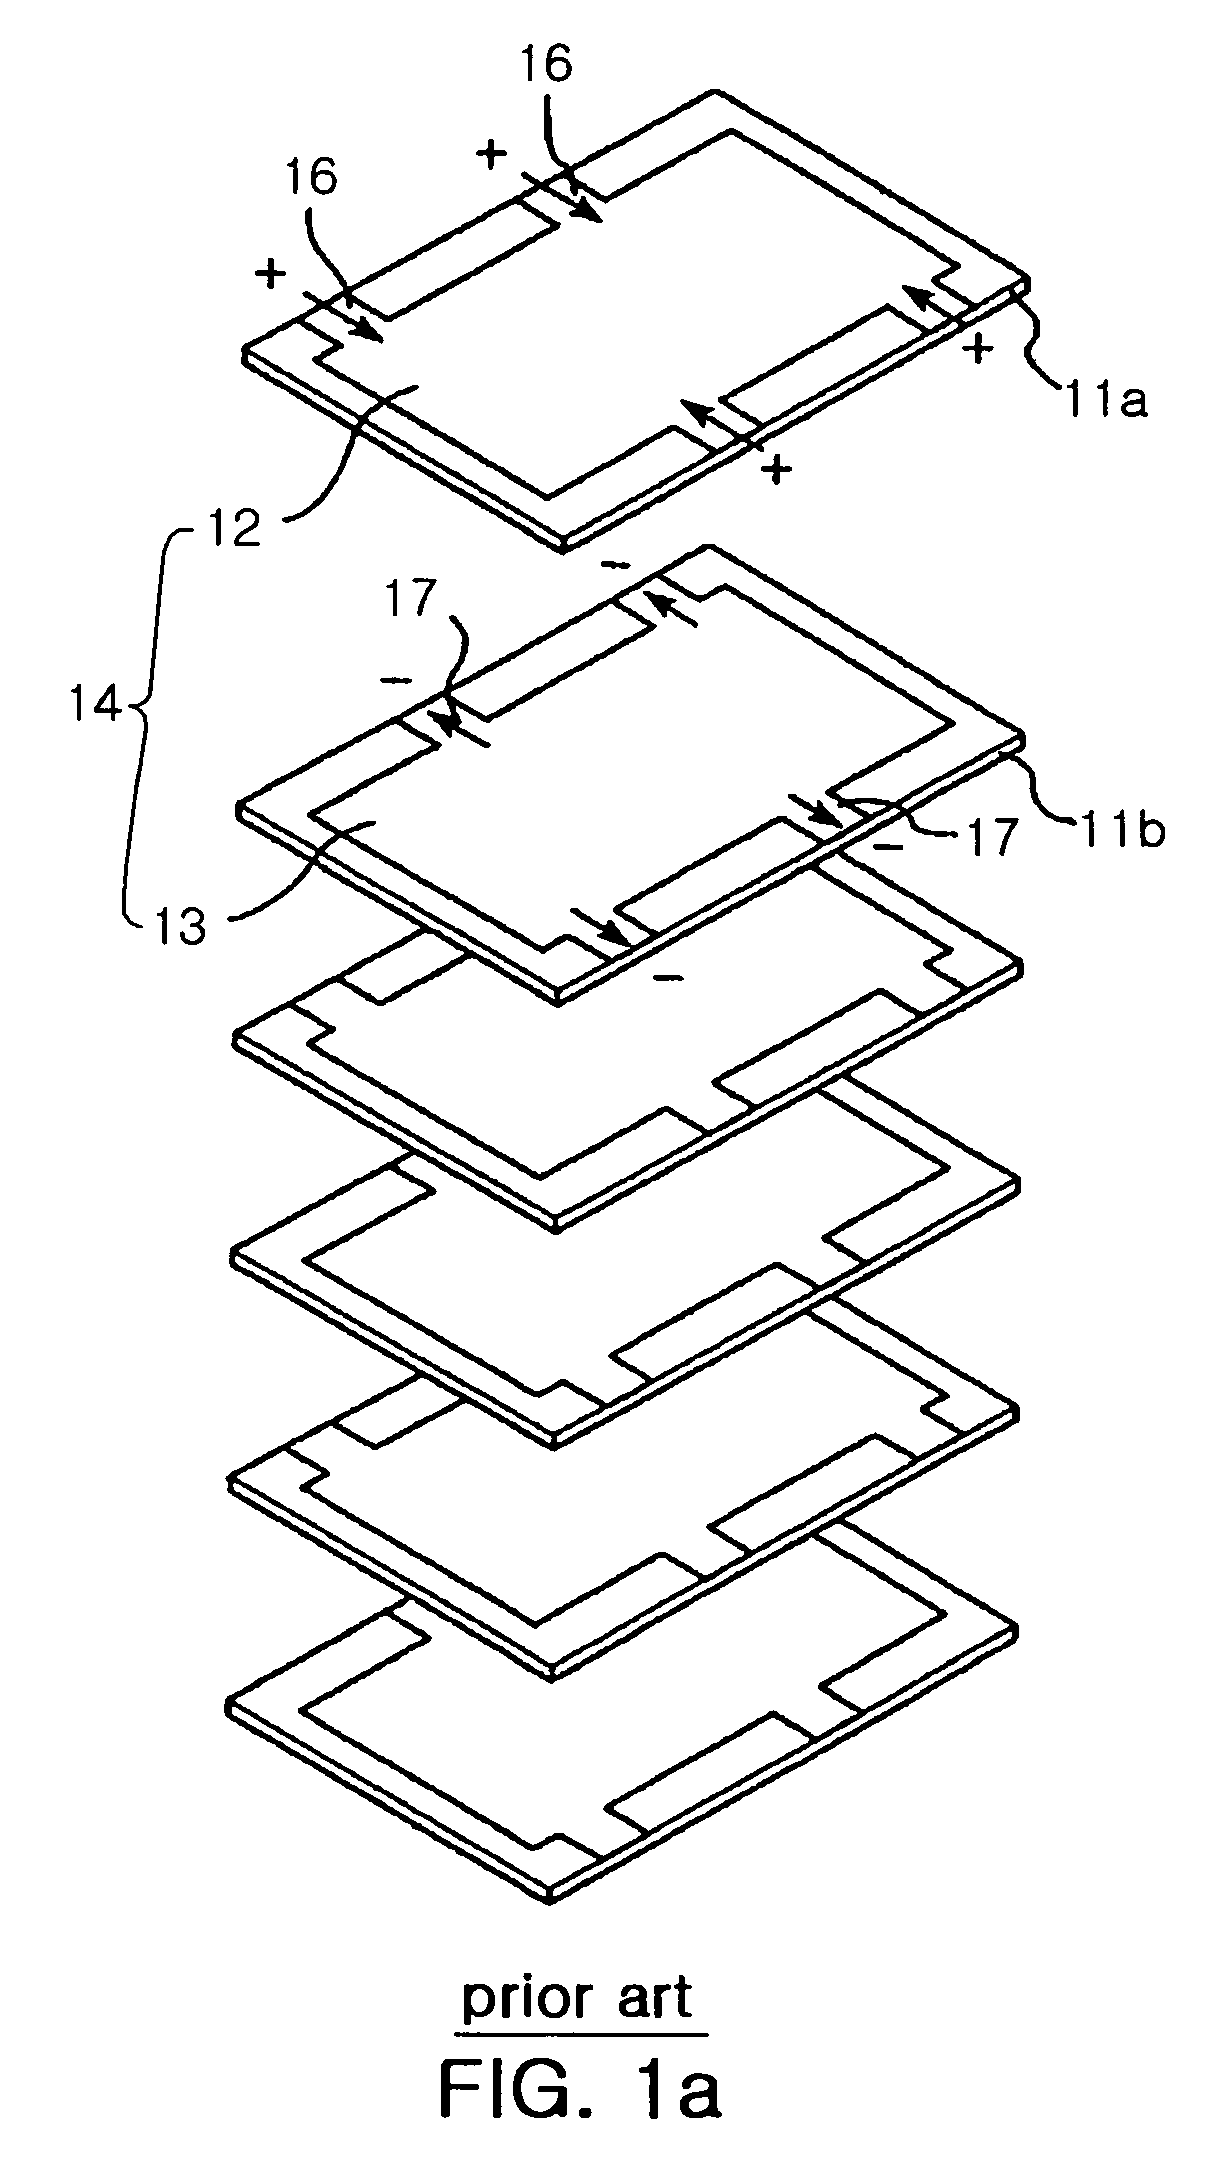 Multilayer chip capacitor